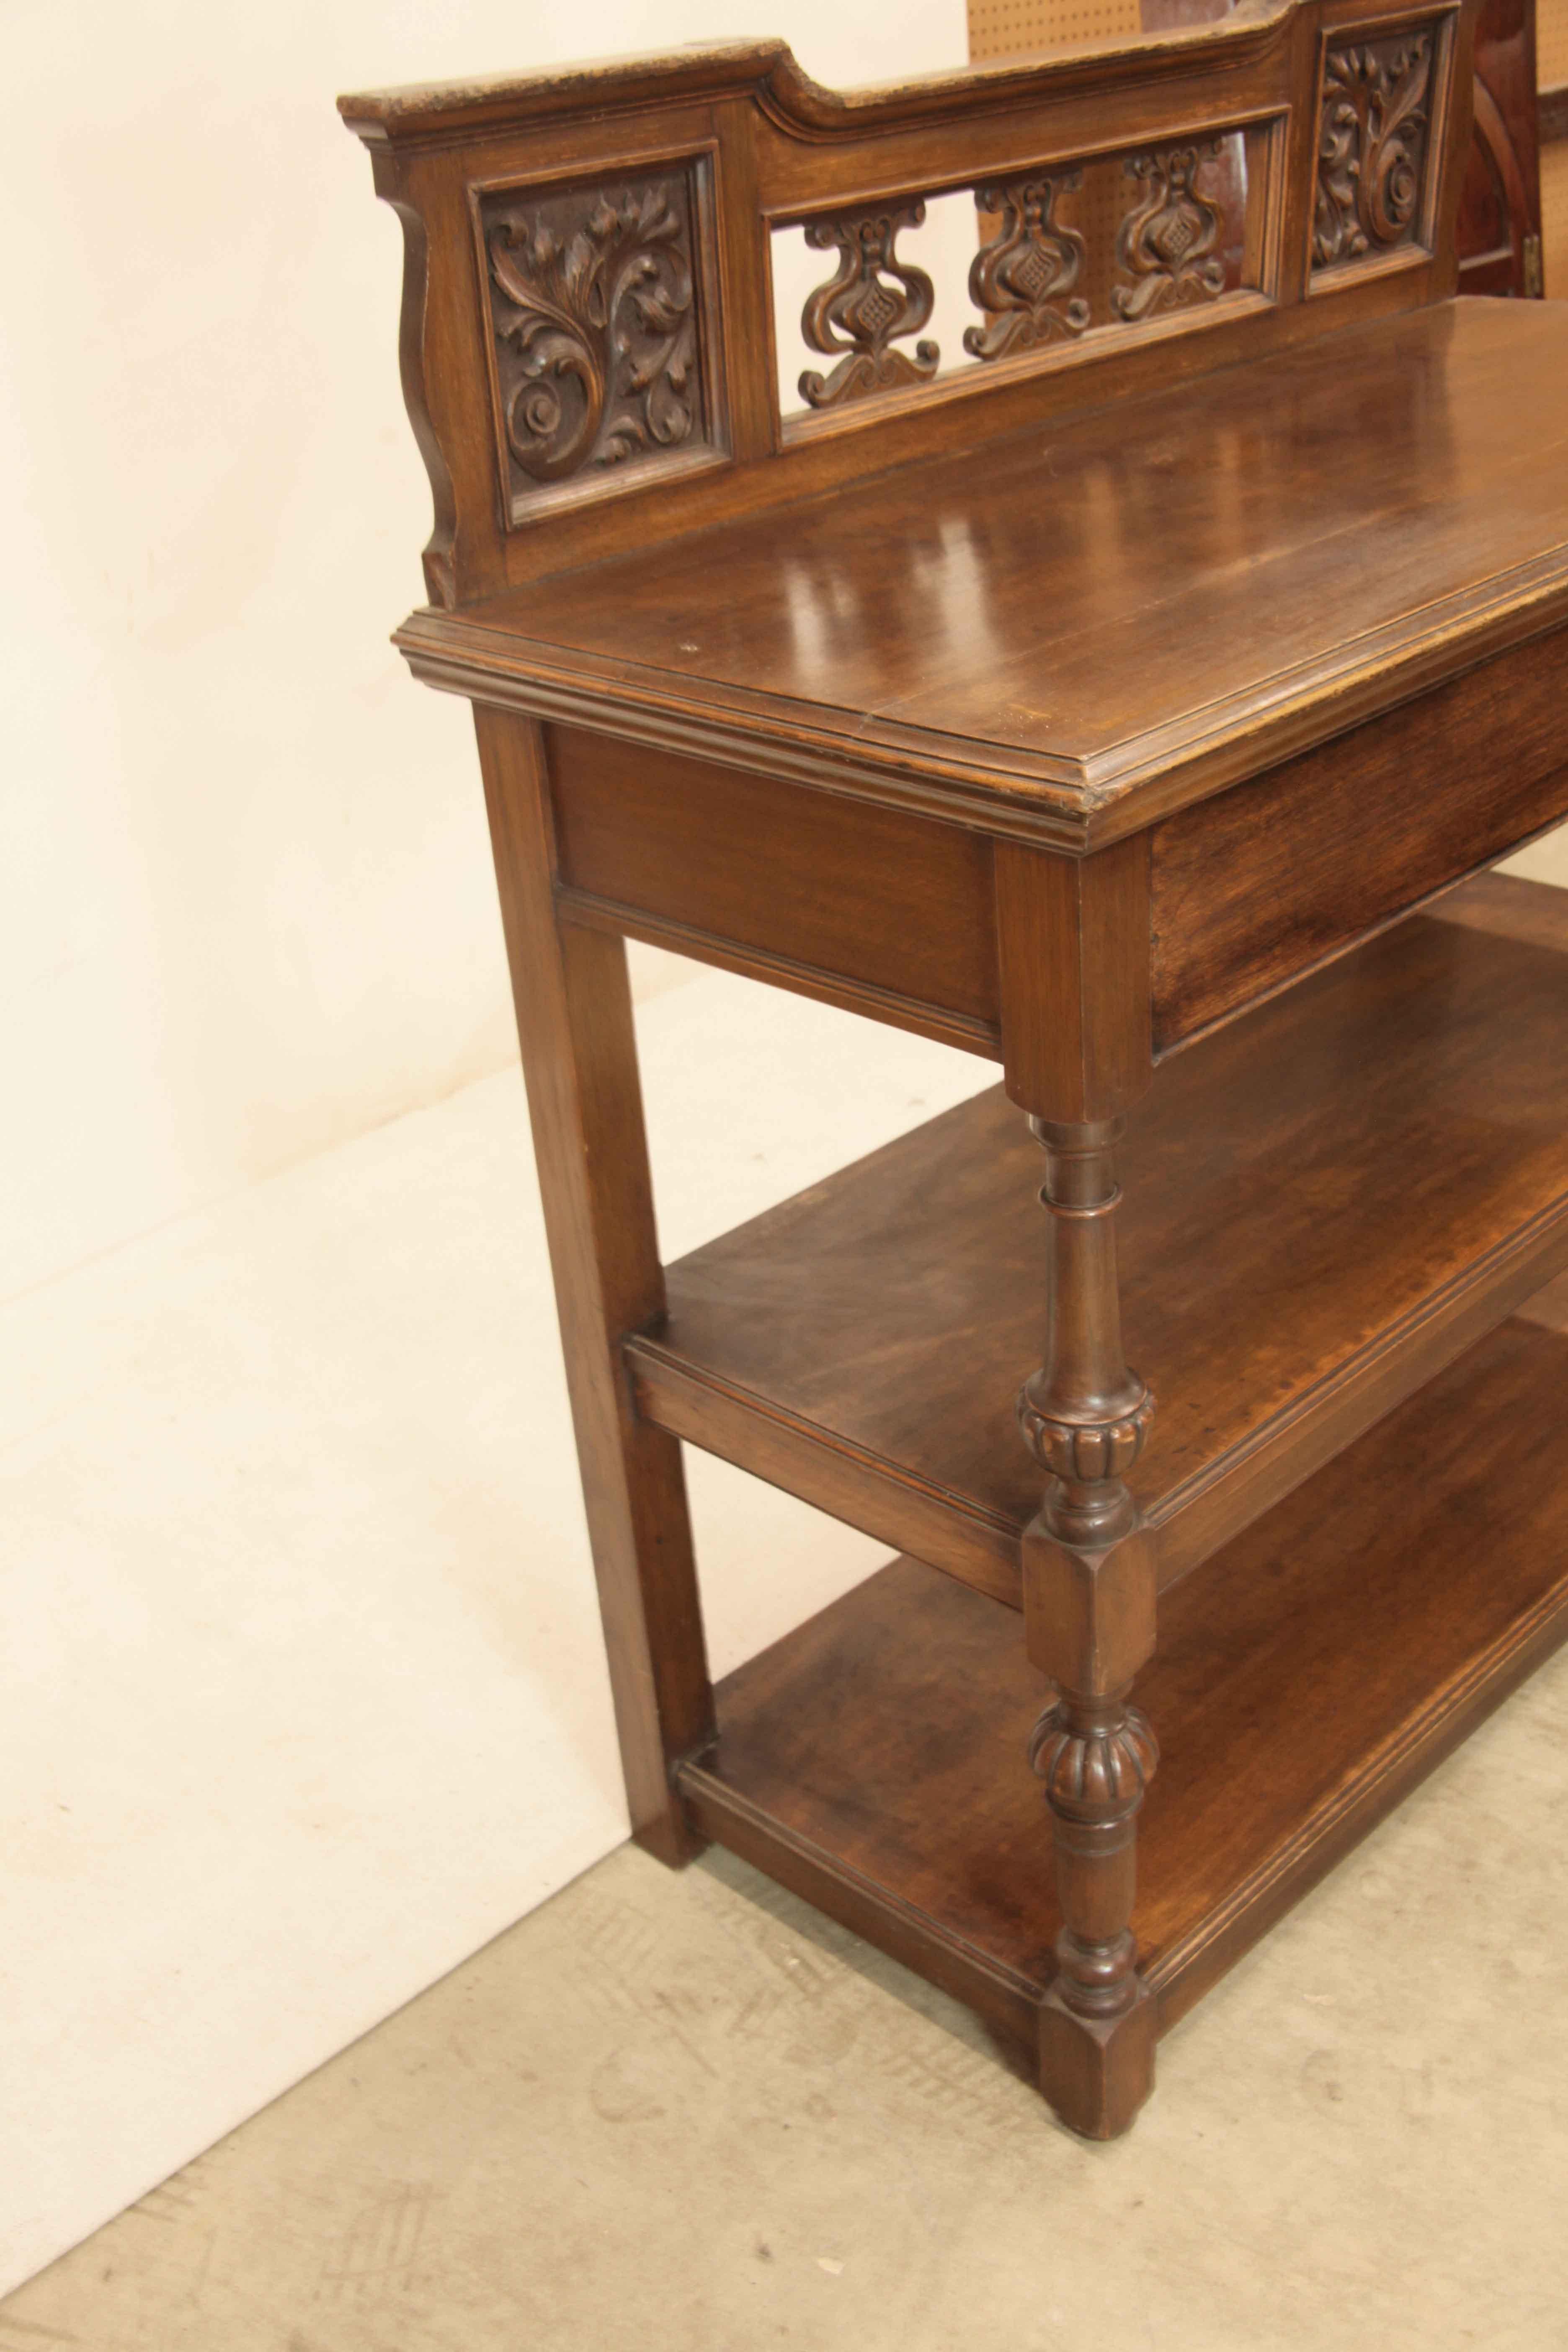 English oak three tier buffet,  the back gallery features square panels of stylized foliage and volutes at each end with three whimsical carved motifs in the center,  top has nice oak color and patina with molding around the front and sides; lower